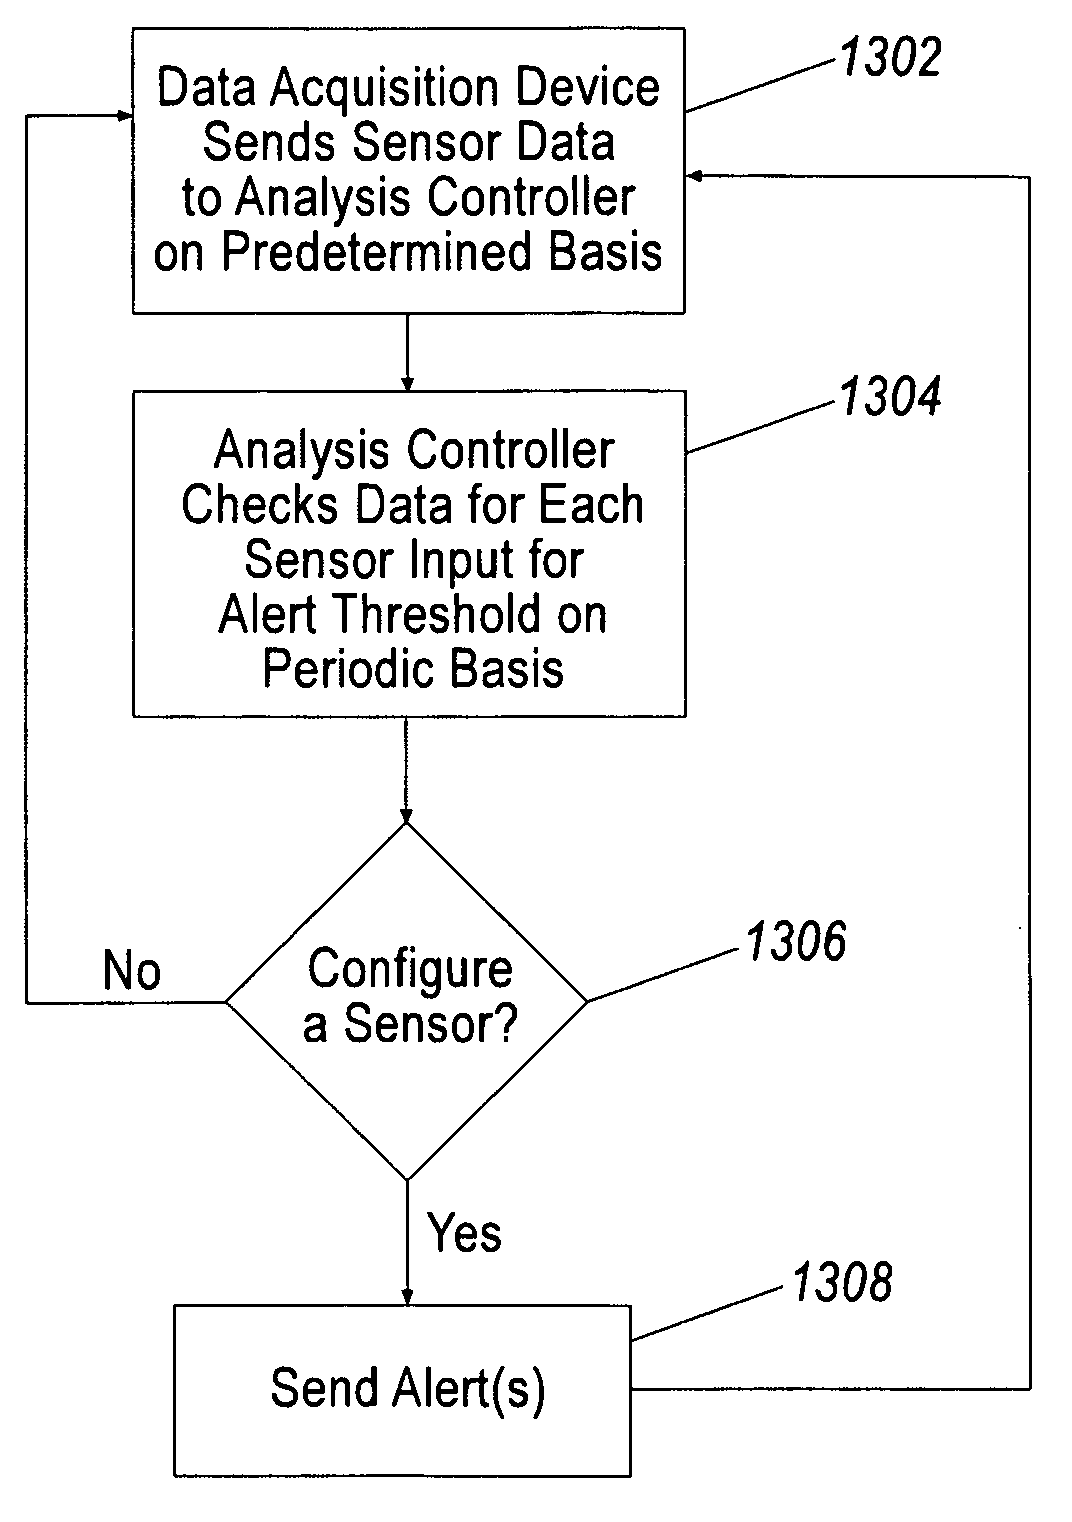 System and method for tracking asset usage and performance